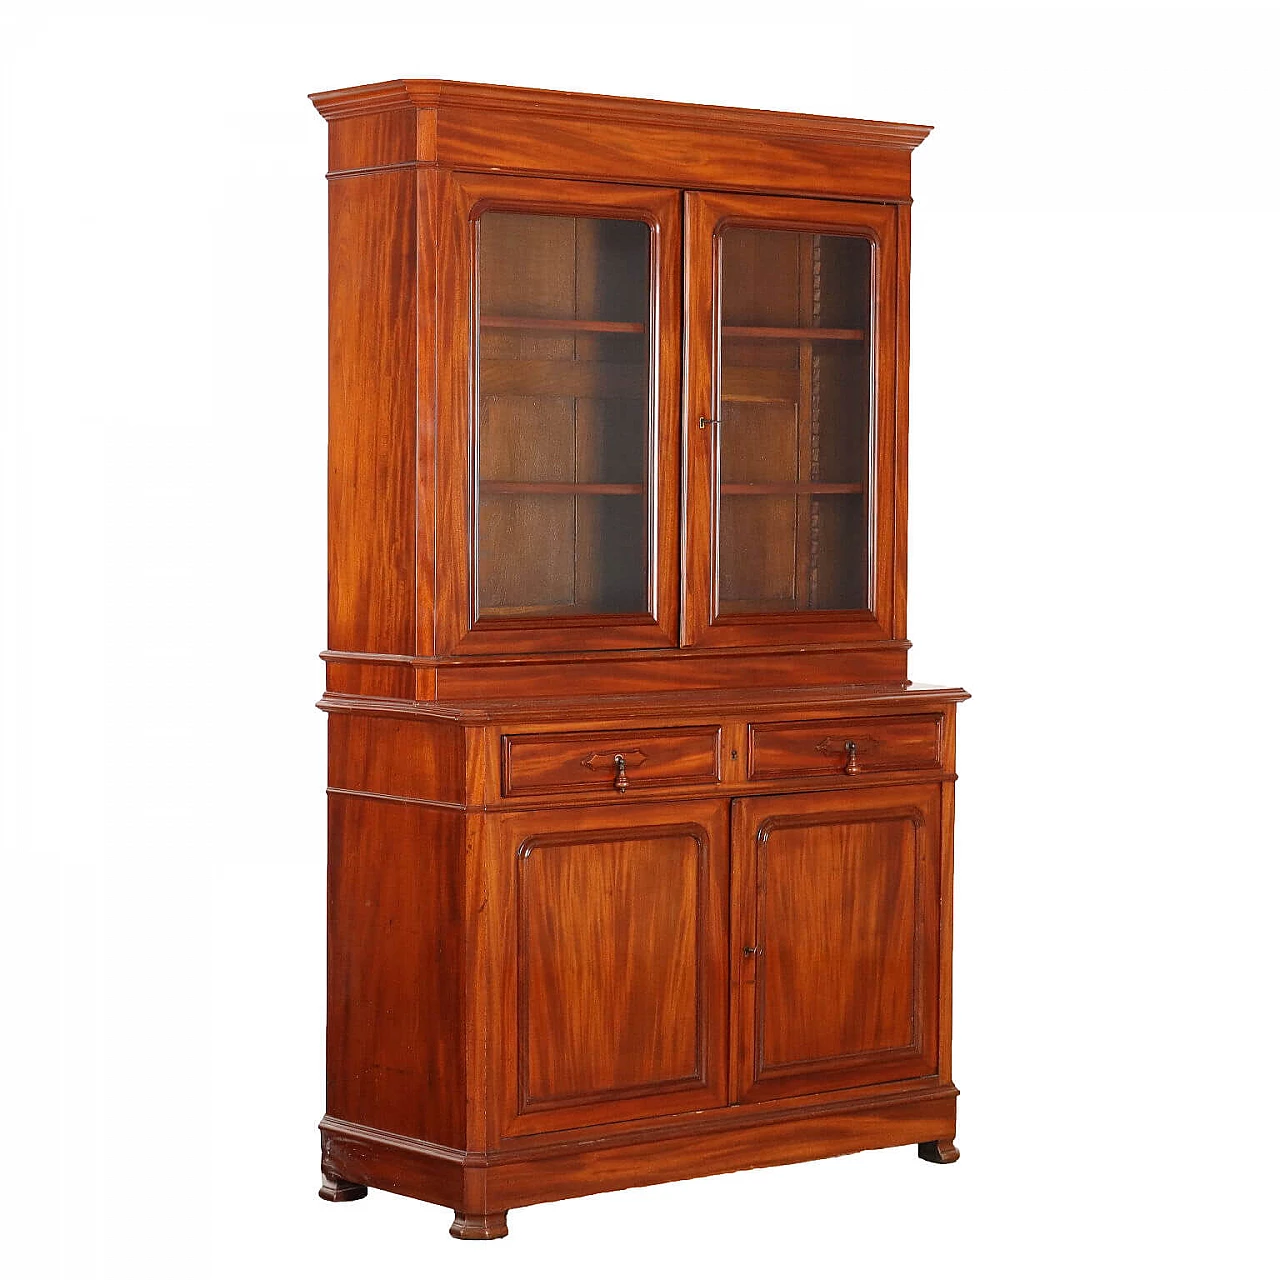 Mahogany bookcase with two glass doors and drawers, late 19th century 1